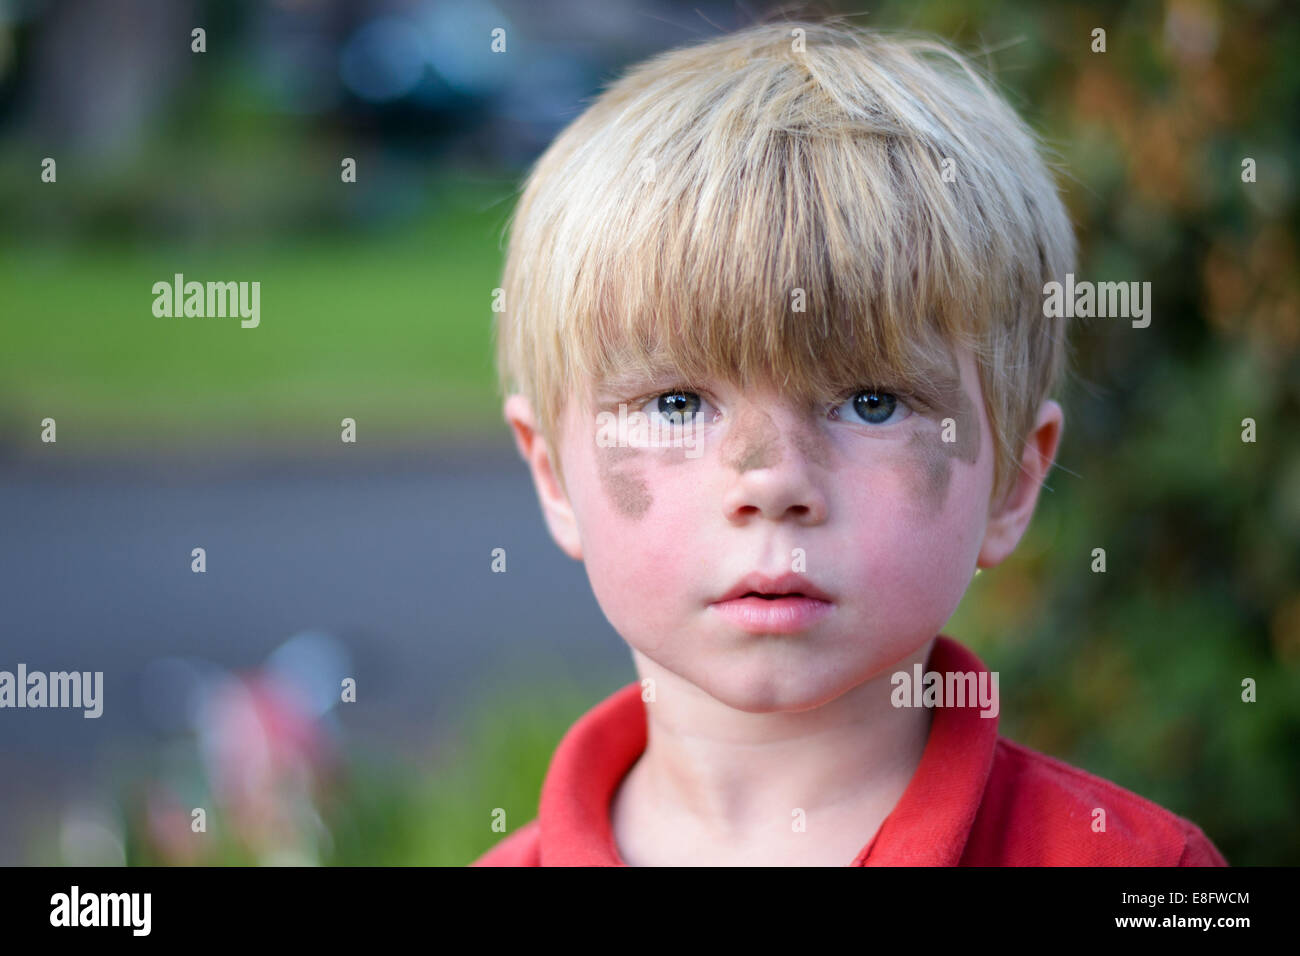 Portrait of a boy with a dirty face Stock Photo